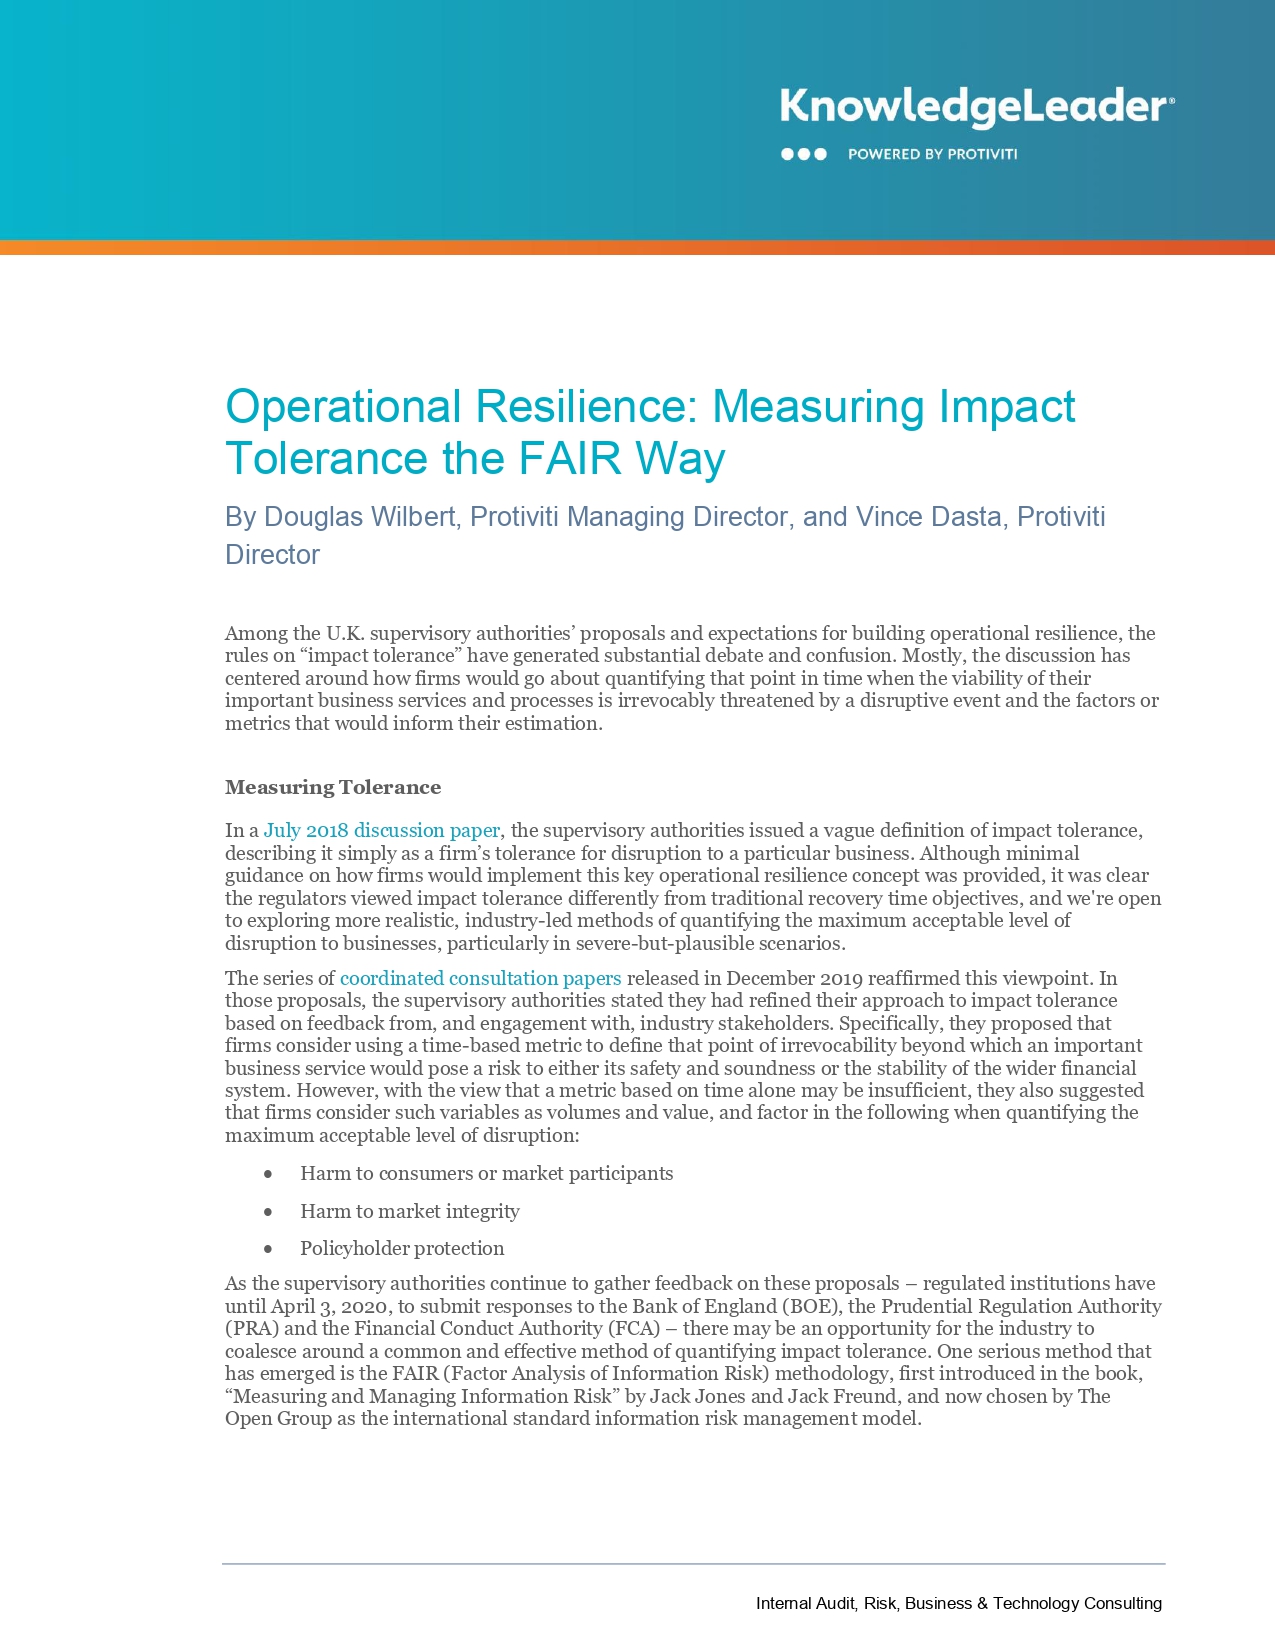 Screenshot of Operational Resilience: Measuring Impact Tolerance the FAIR Way